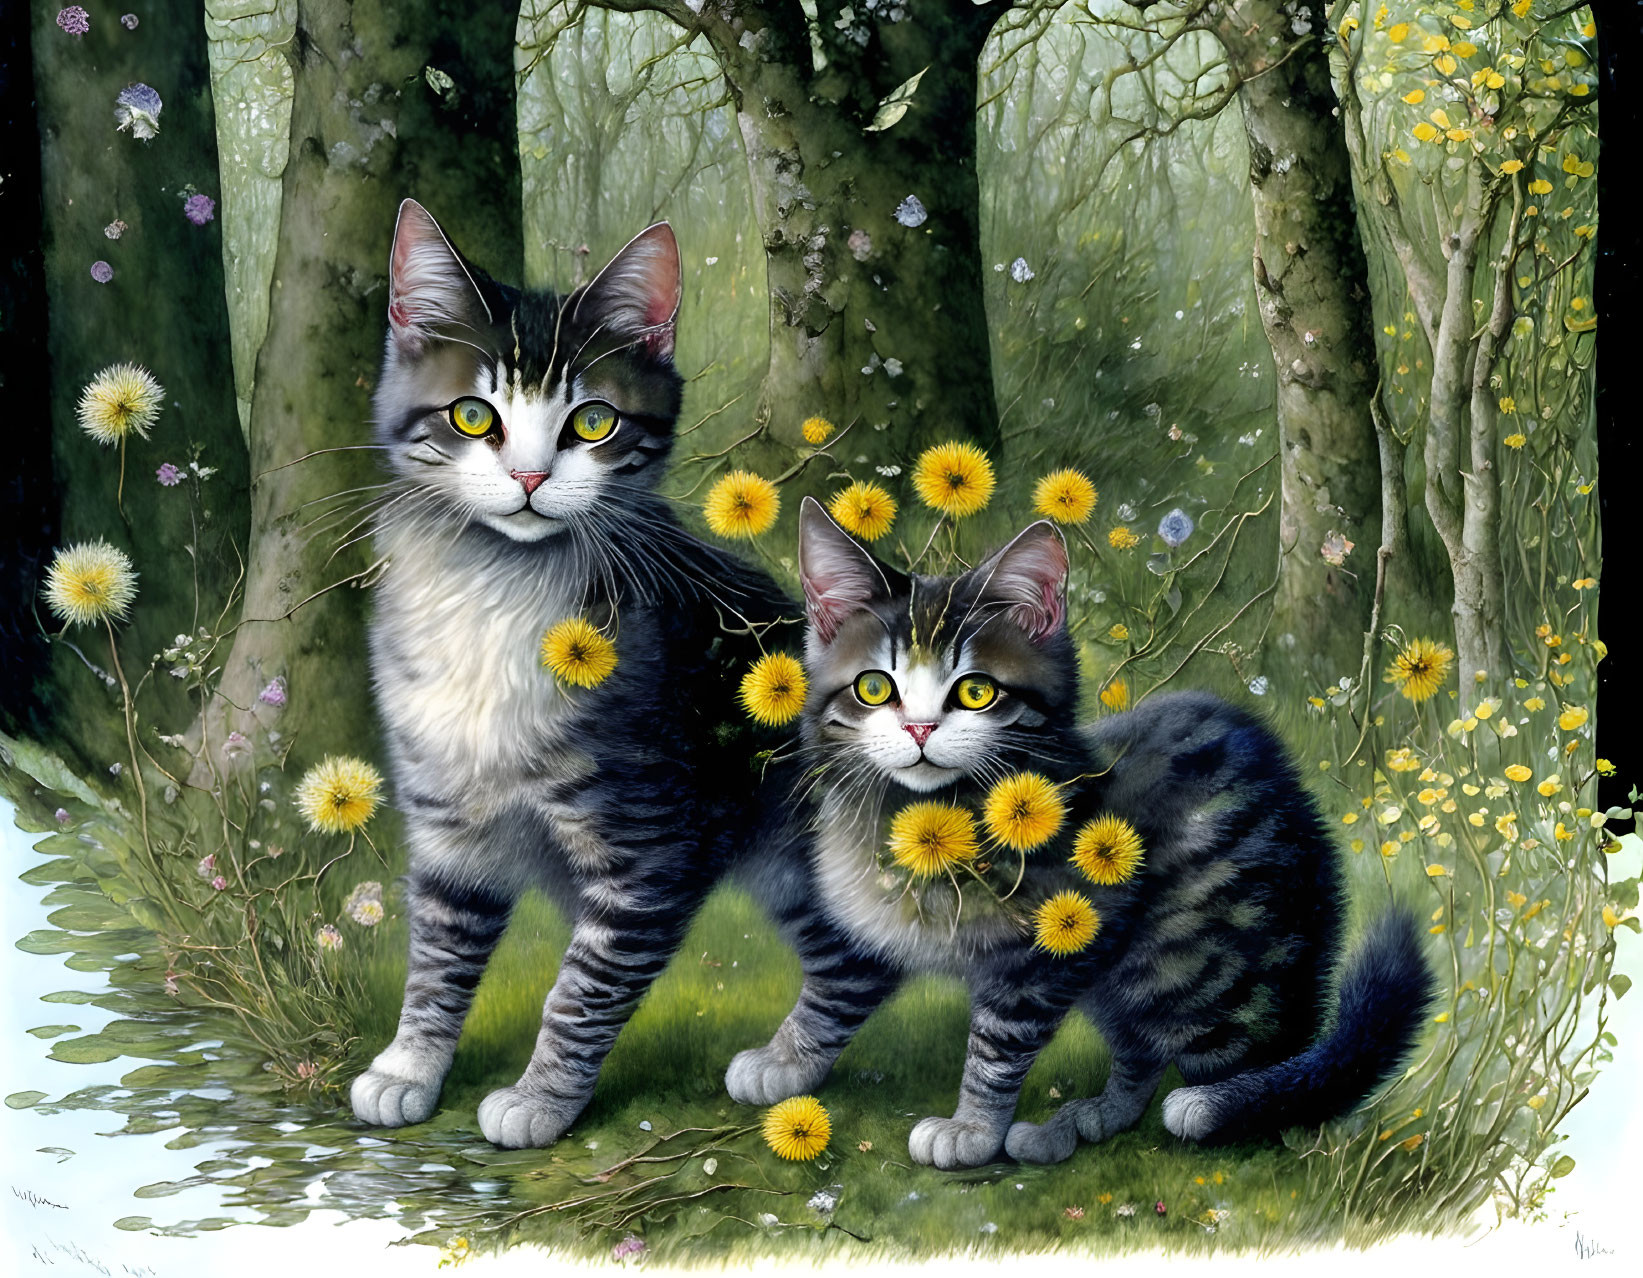 dandelion cats, Eyes all pupil, when skies turn gr